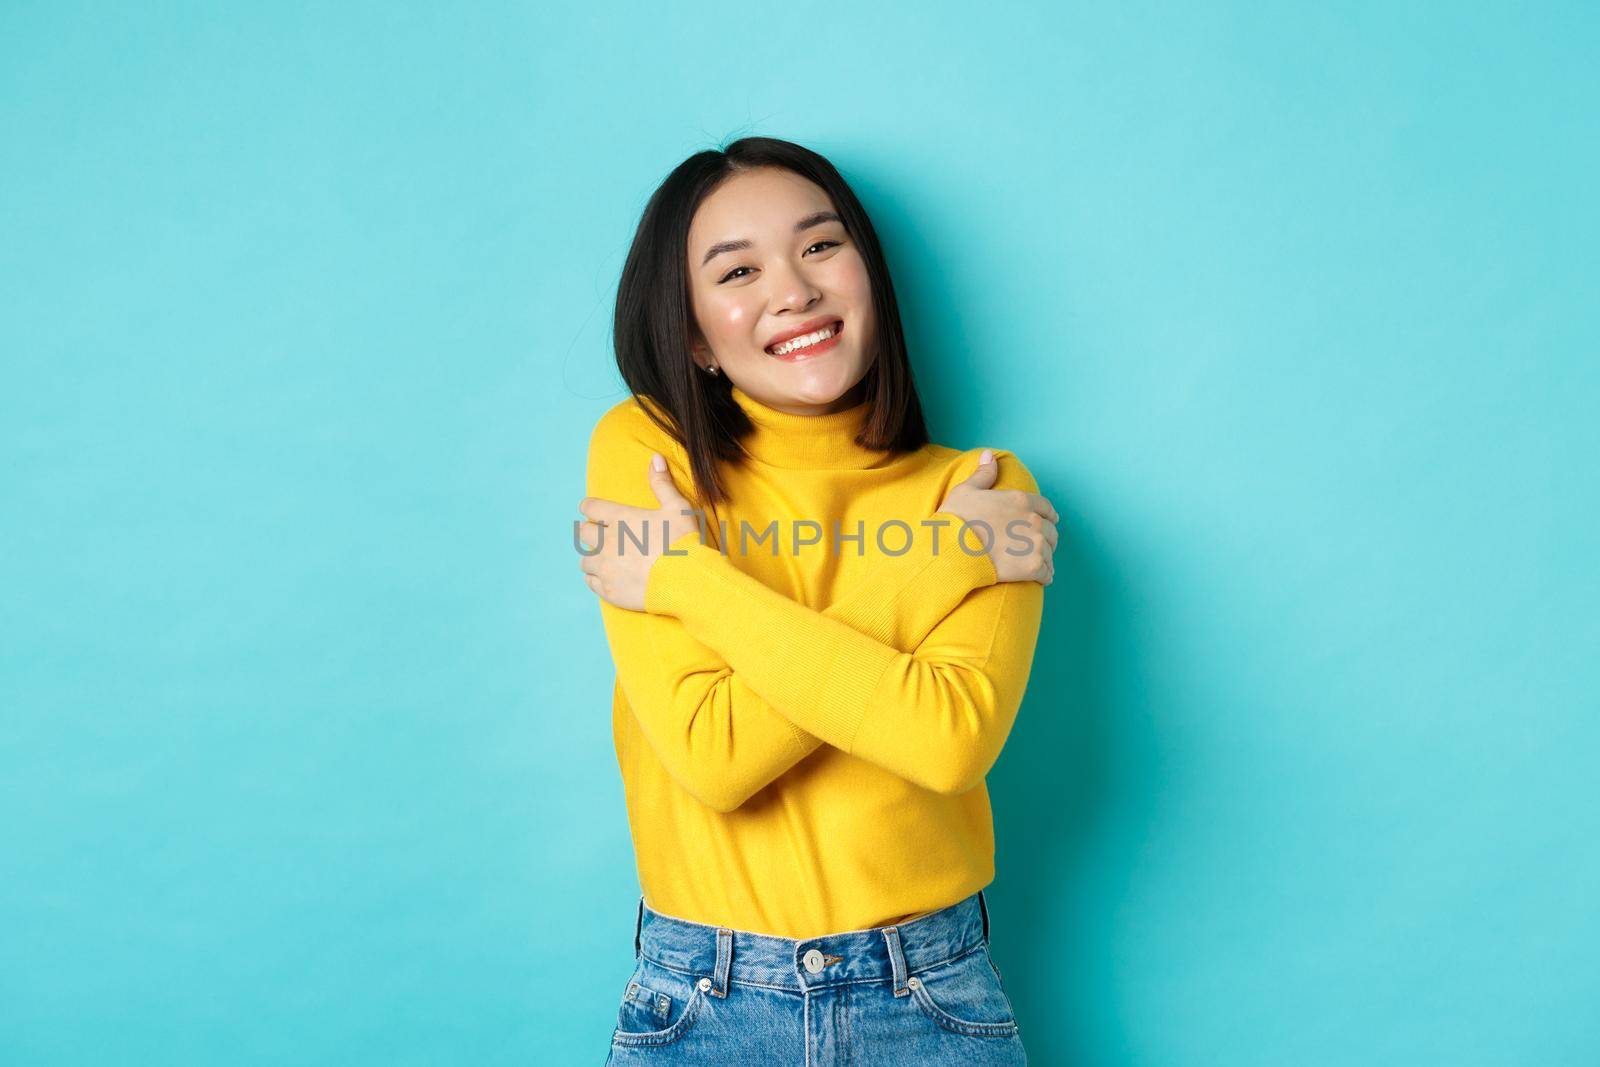 Cheerful beautiful girl embracing own body, smiling and cuddling herself, standing carefree in yellow pullover against blue background.